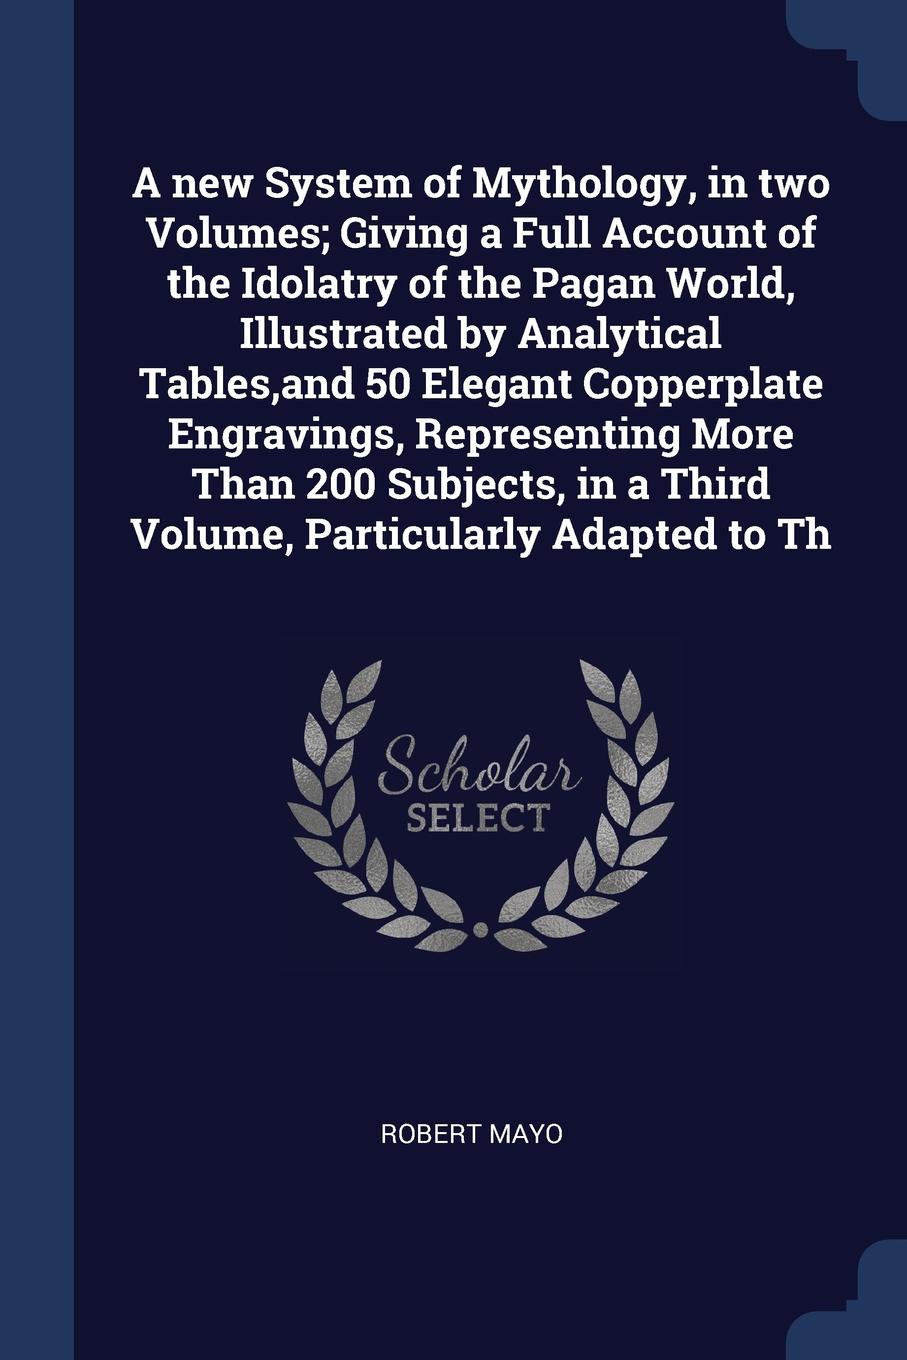 A new System of Mythology, in two Volumes; Giving a Full Account of the Idolatry of the Pagan World, Illustrated by Analytical Tables,and 50 Elegant Copperplate Engravings, Representing More Than 200 Subjects, in a Third Volume, Particularly Adapt...